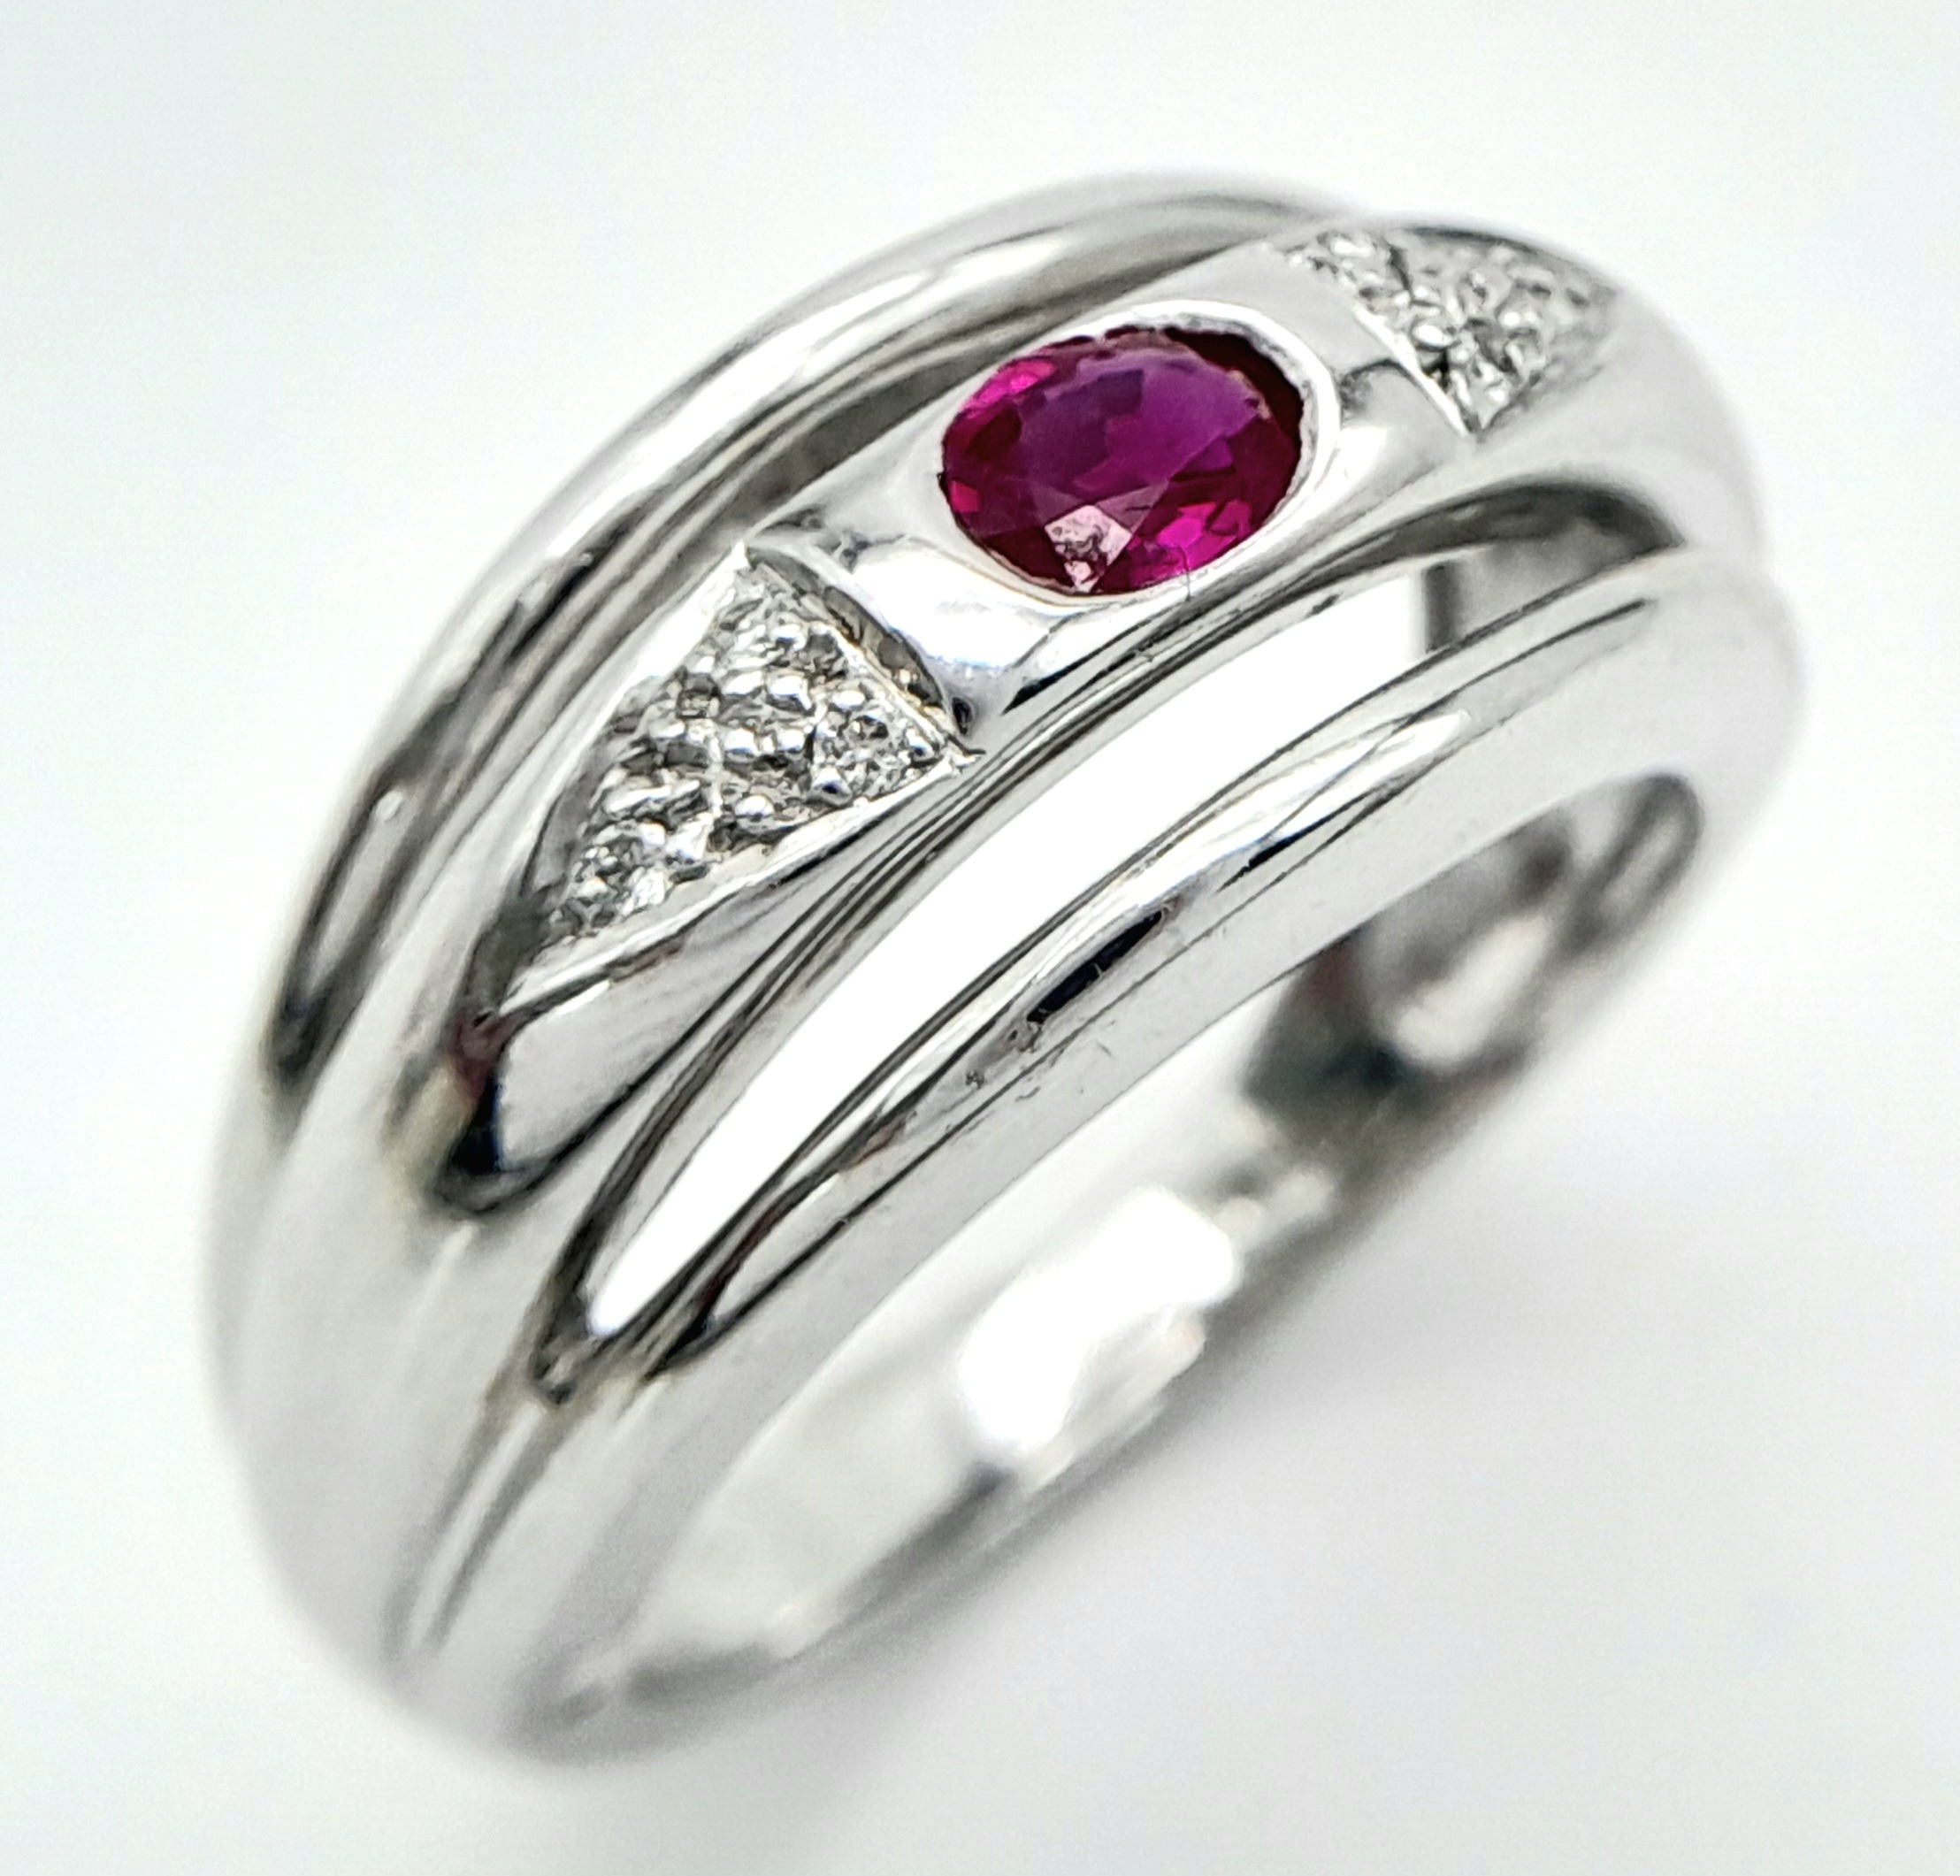 AN 18K WHITE GOLD DIAMOND & RUBY RING. Size N, 6.6g total weight. Ref: SC 8068 - Image 5 of 8